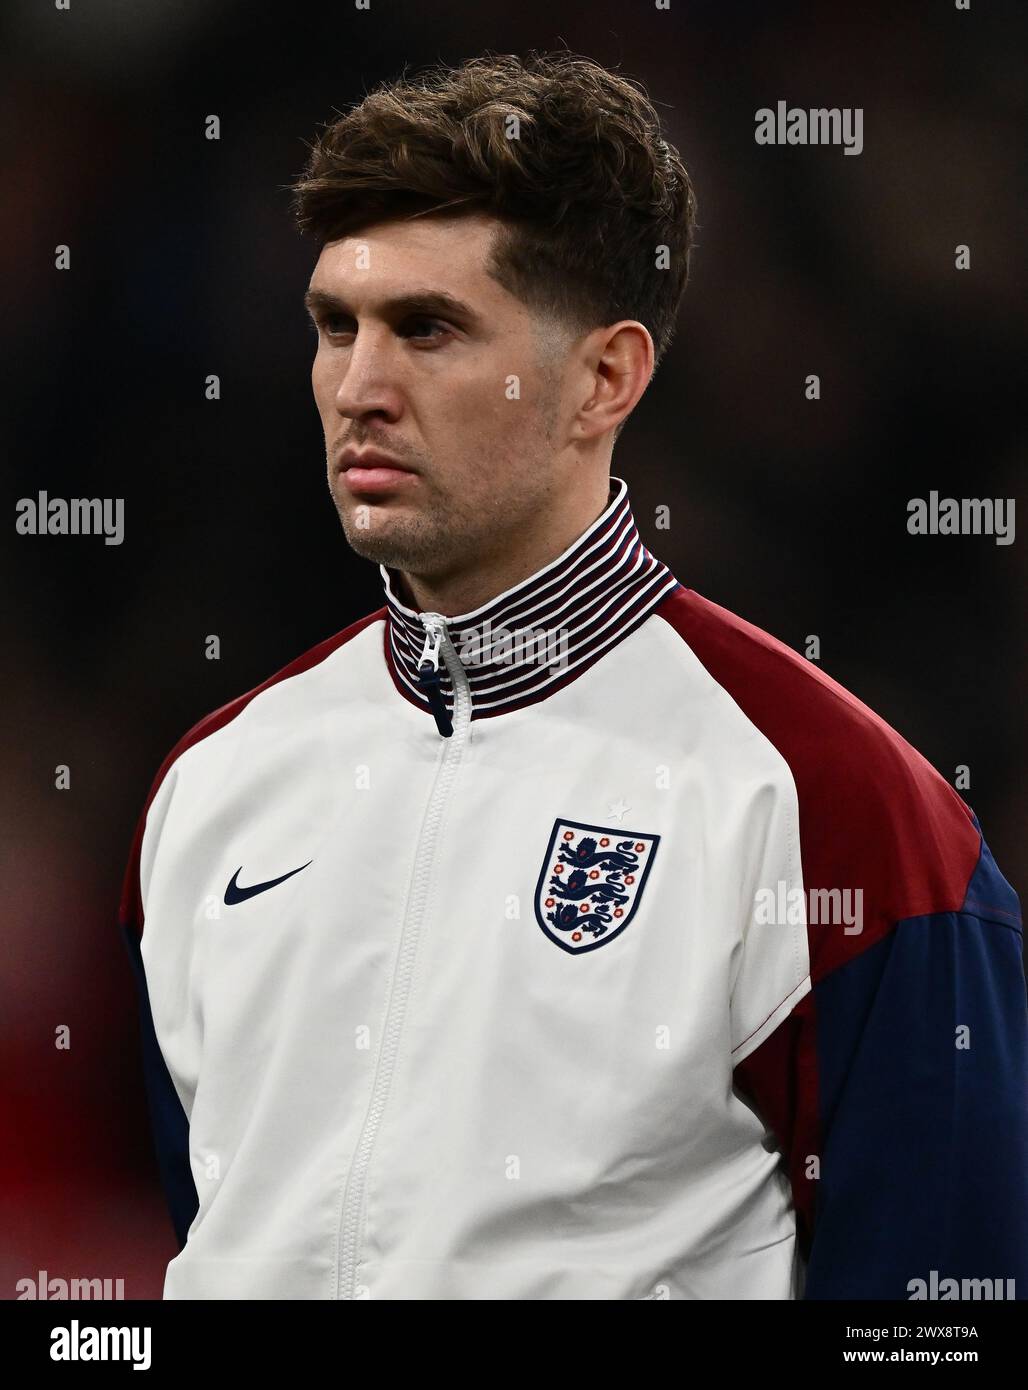 LONDON, ENGLAND - MARCH 23: Headshot, John Stones of Englandl looks on during the international friendly match between England and Brazil at Wembley S Stock Photo